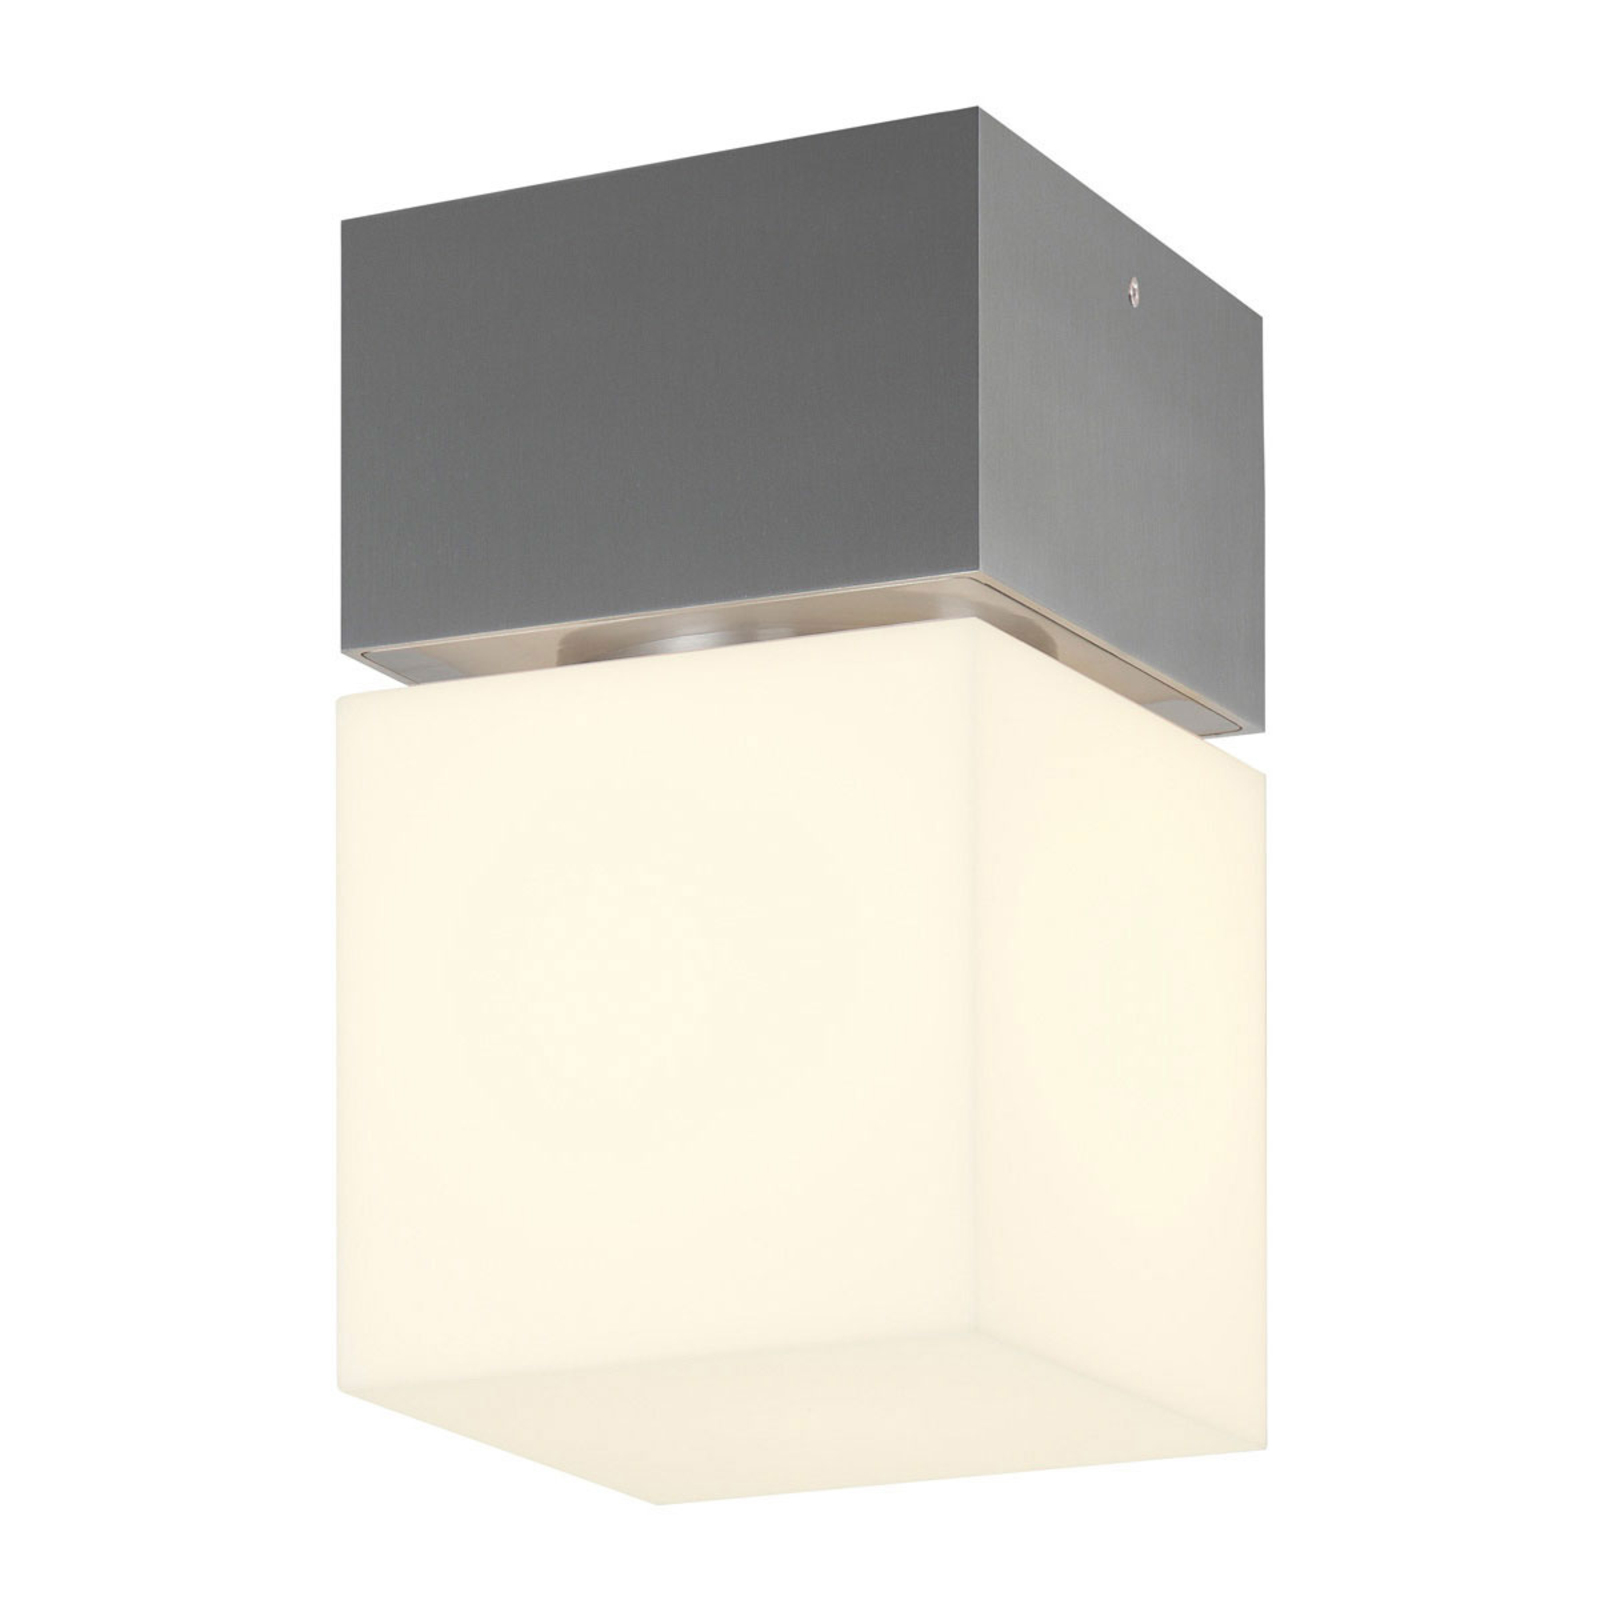 Square LED outdoor ceiling light stainless steel